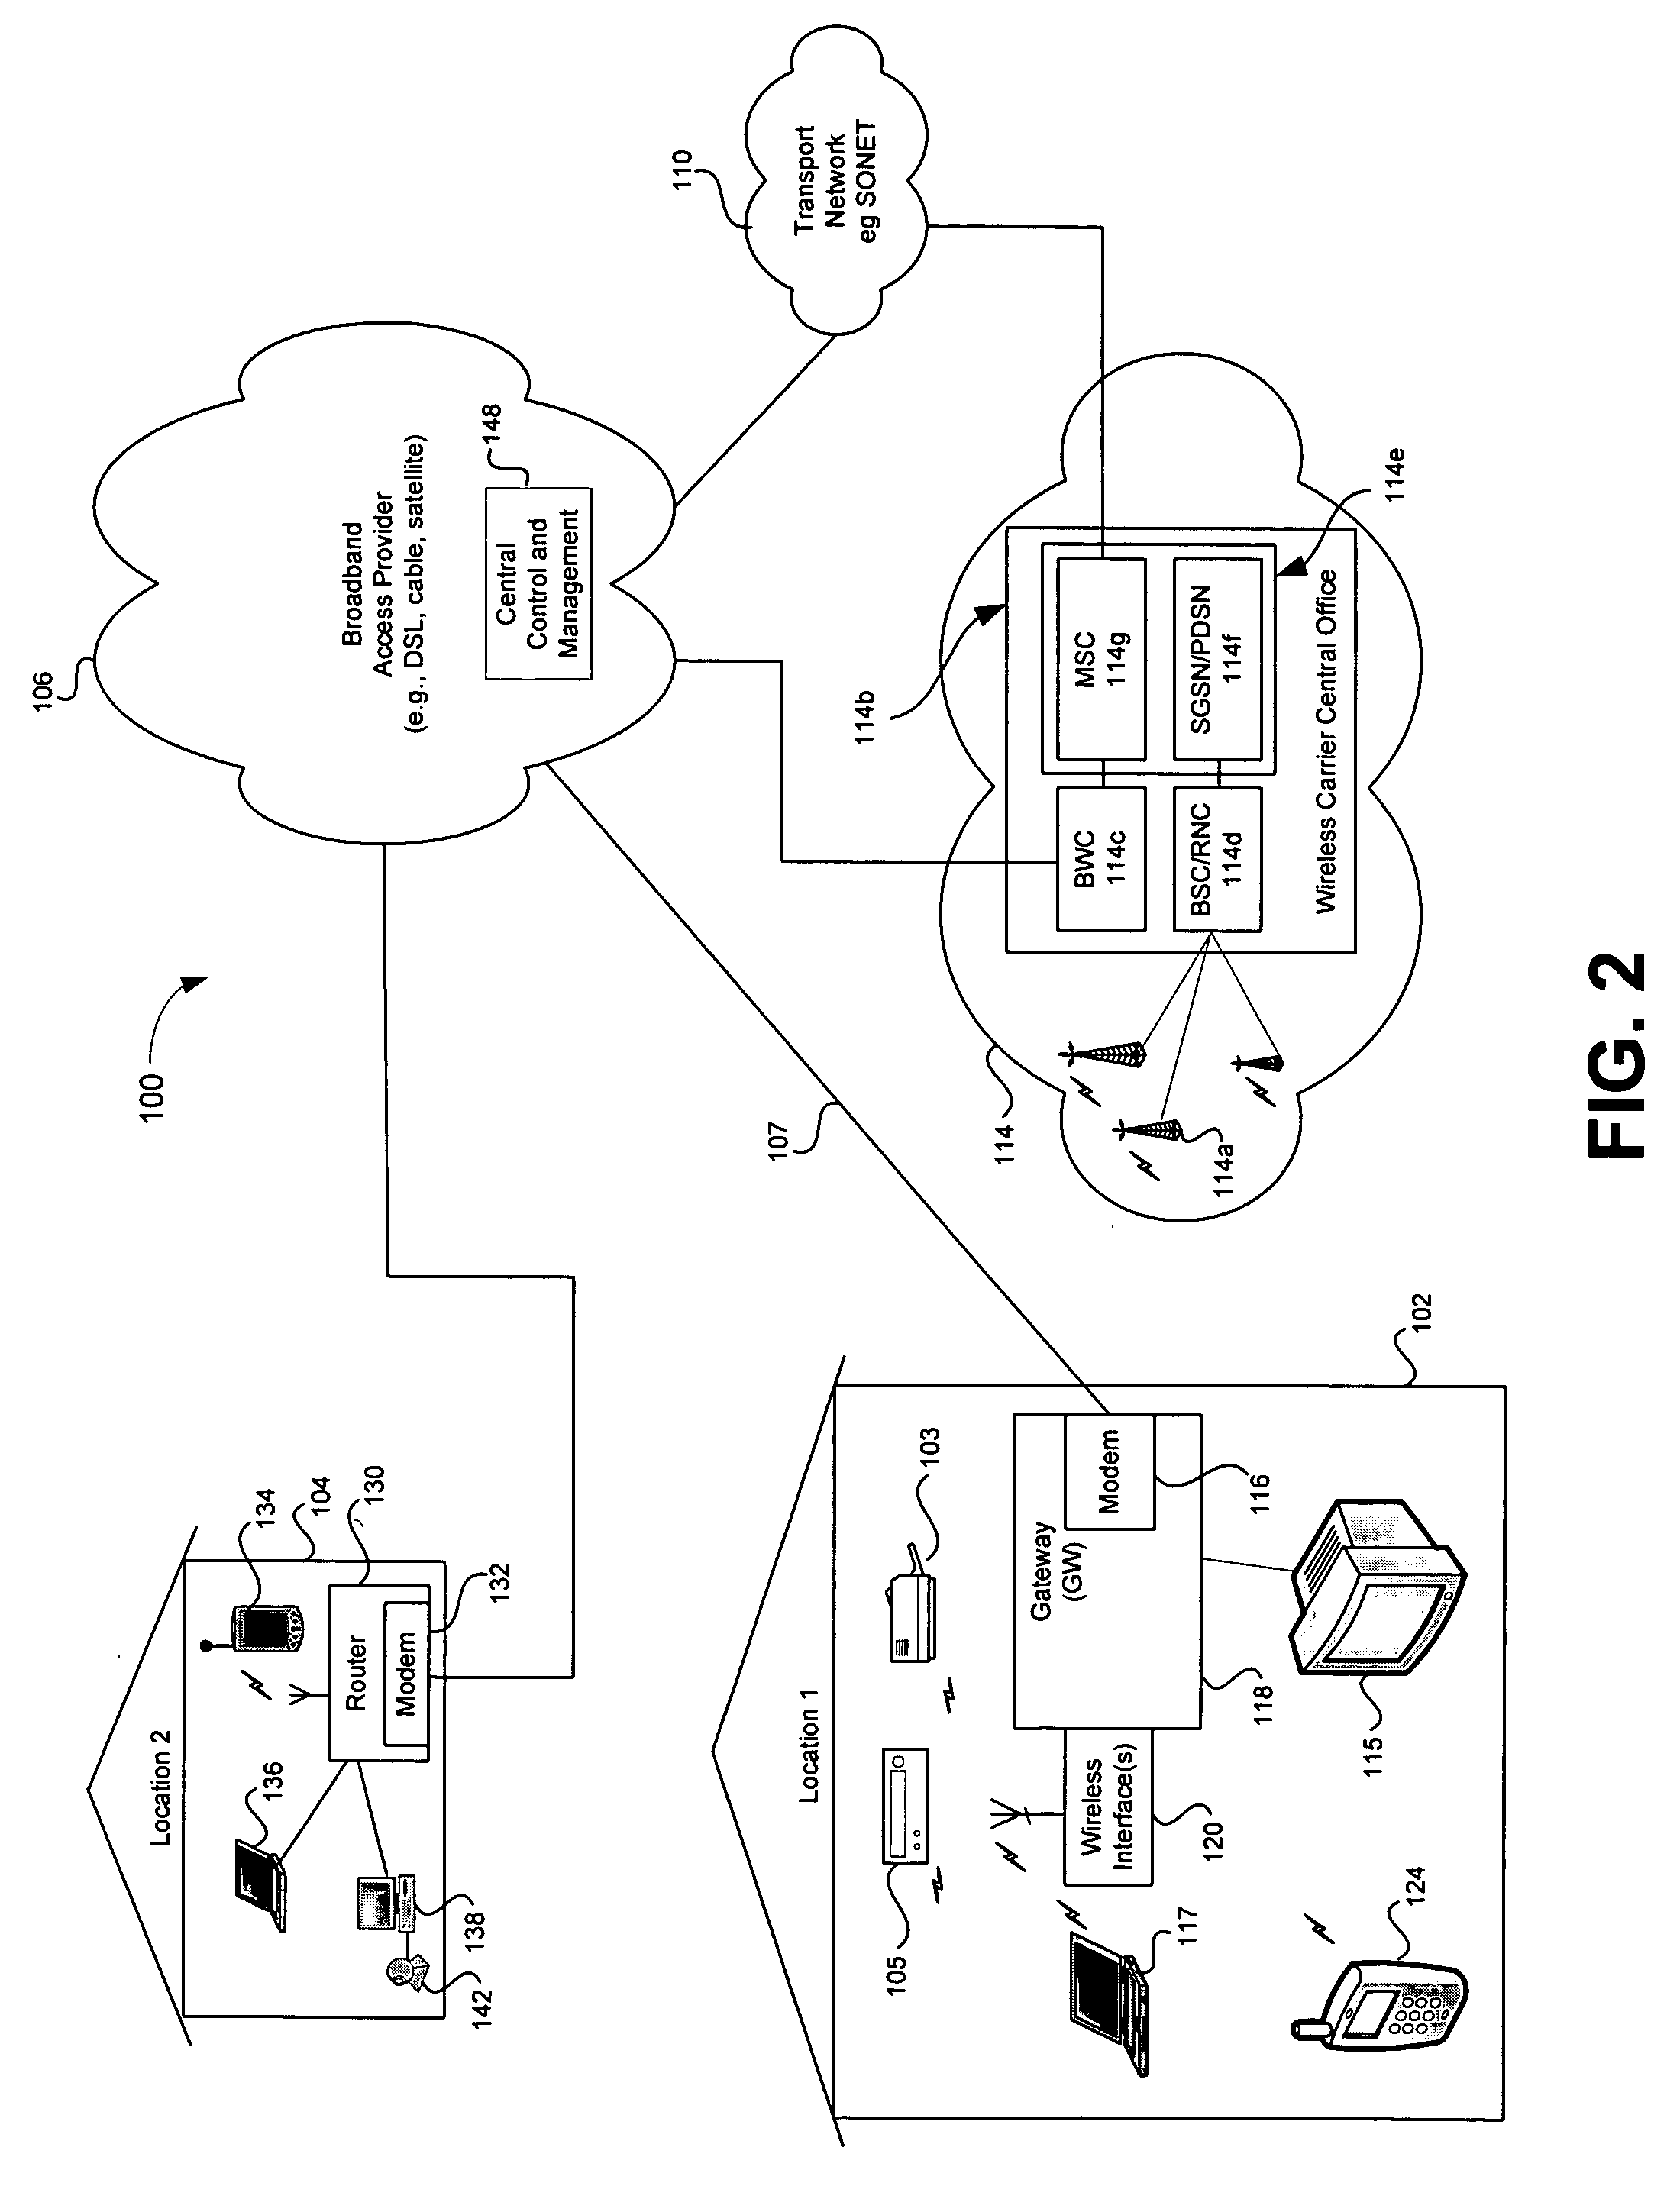 Method and system for extended network access services advertising via a broadband access gateway